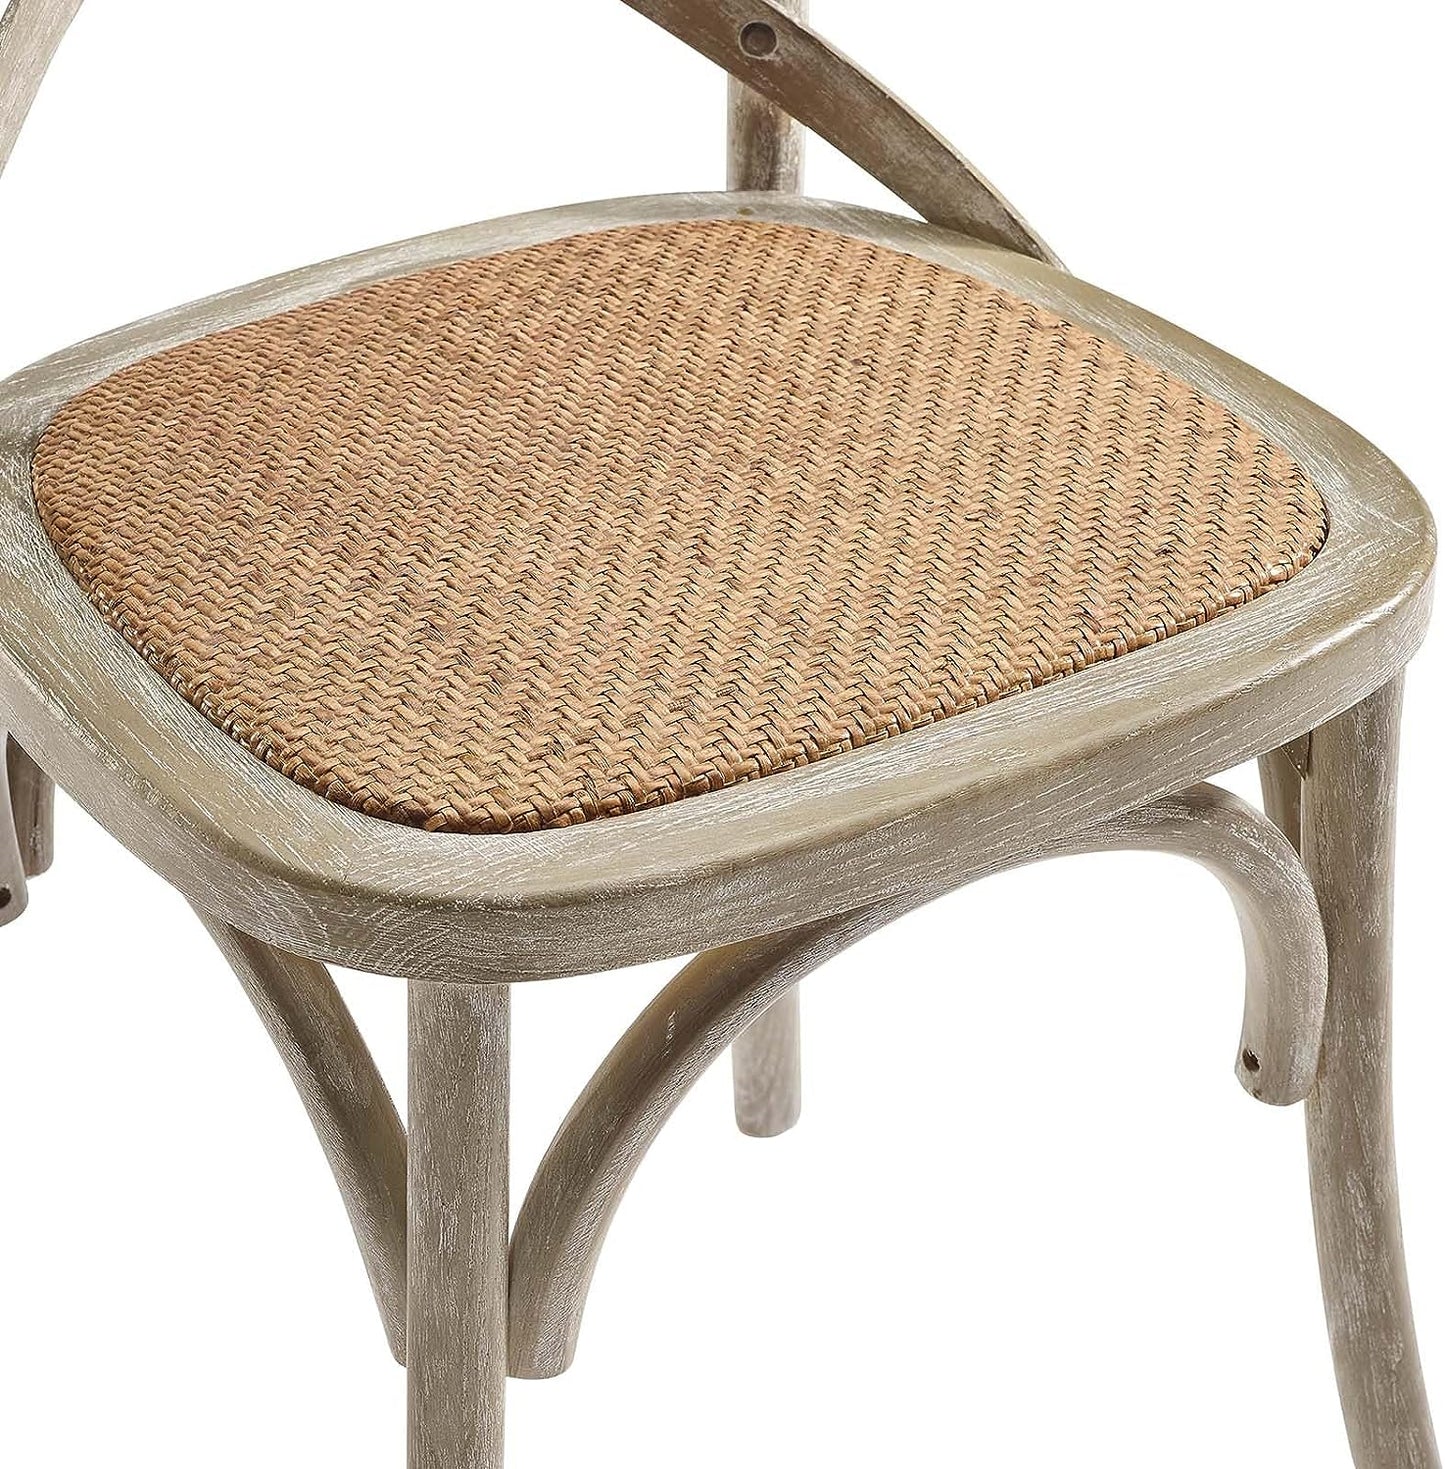 GRAY RATTAN CROSS BACK DINING CHAIRS